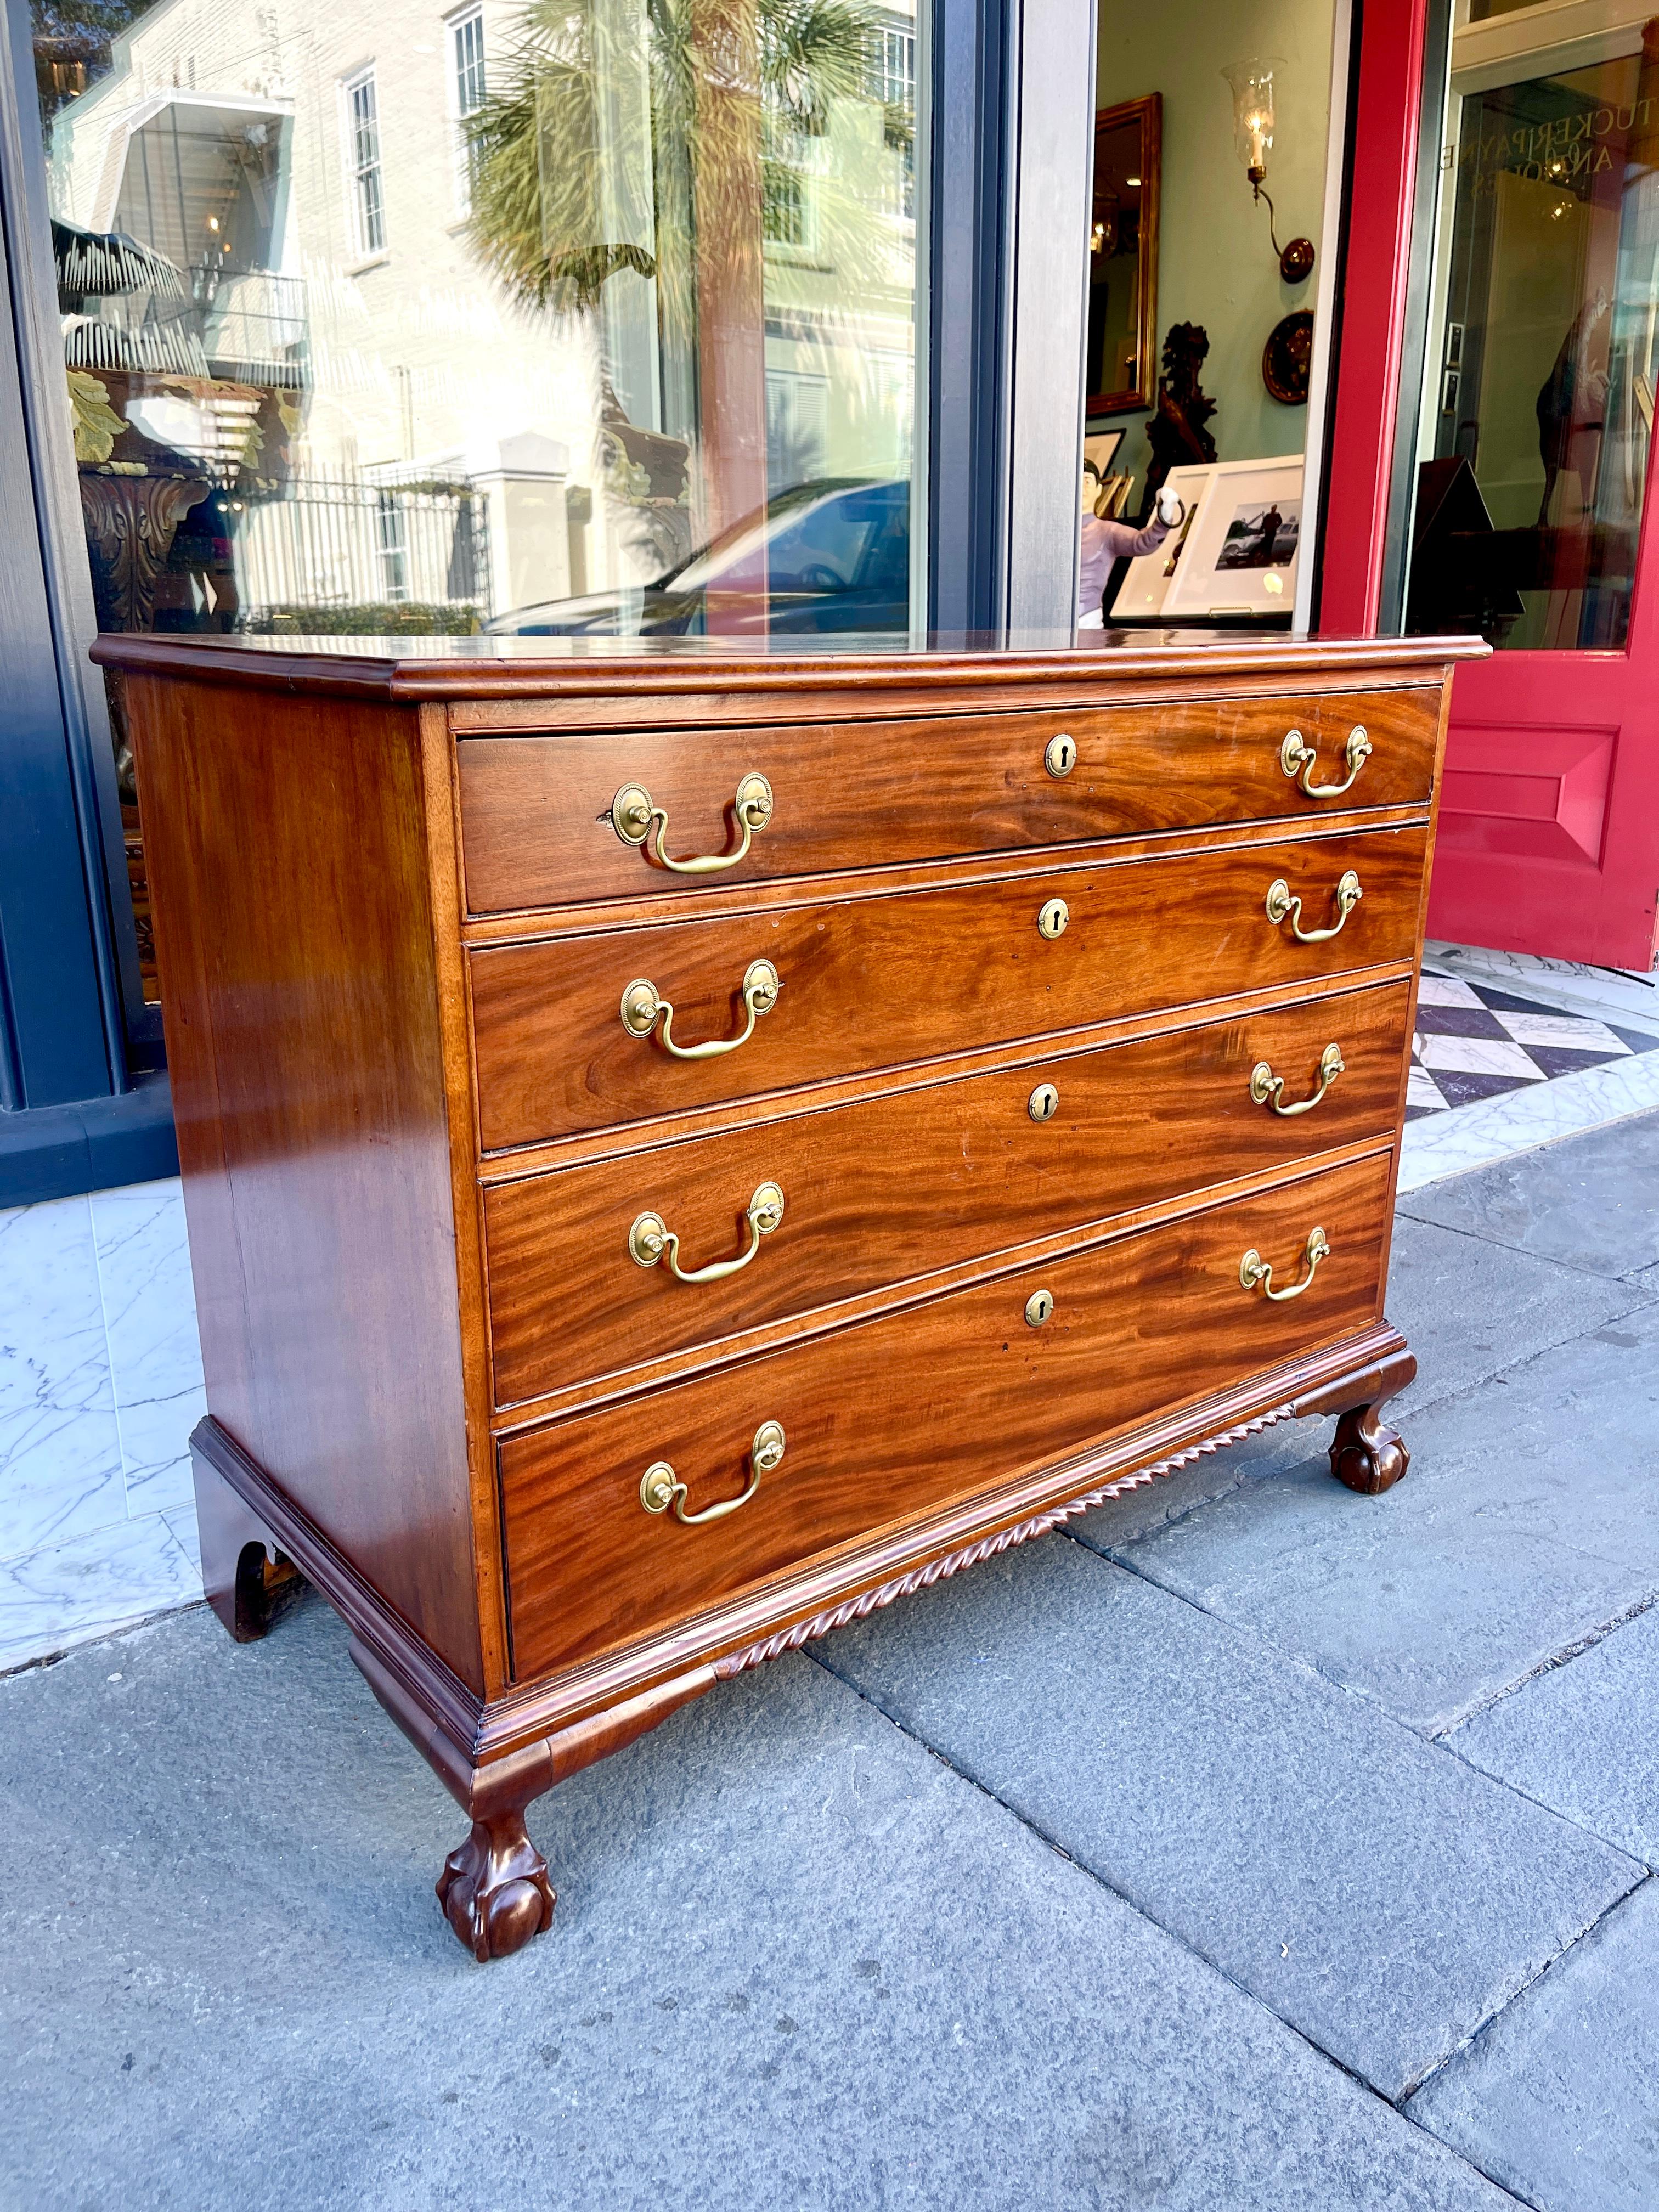 Chippendale Mahogany chest with ball and claw feet 18th century NY For Sale